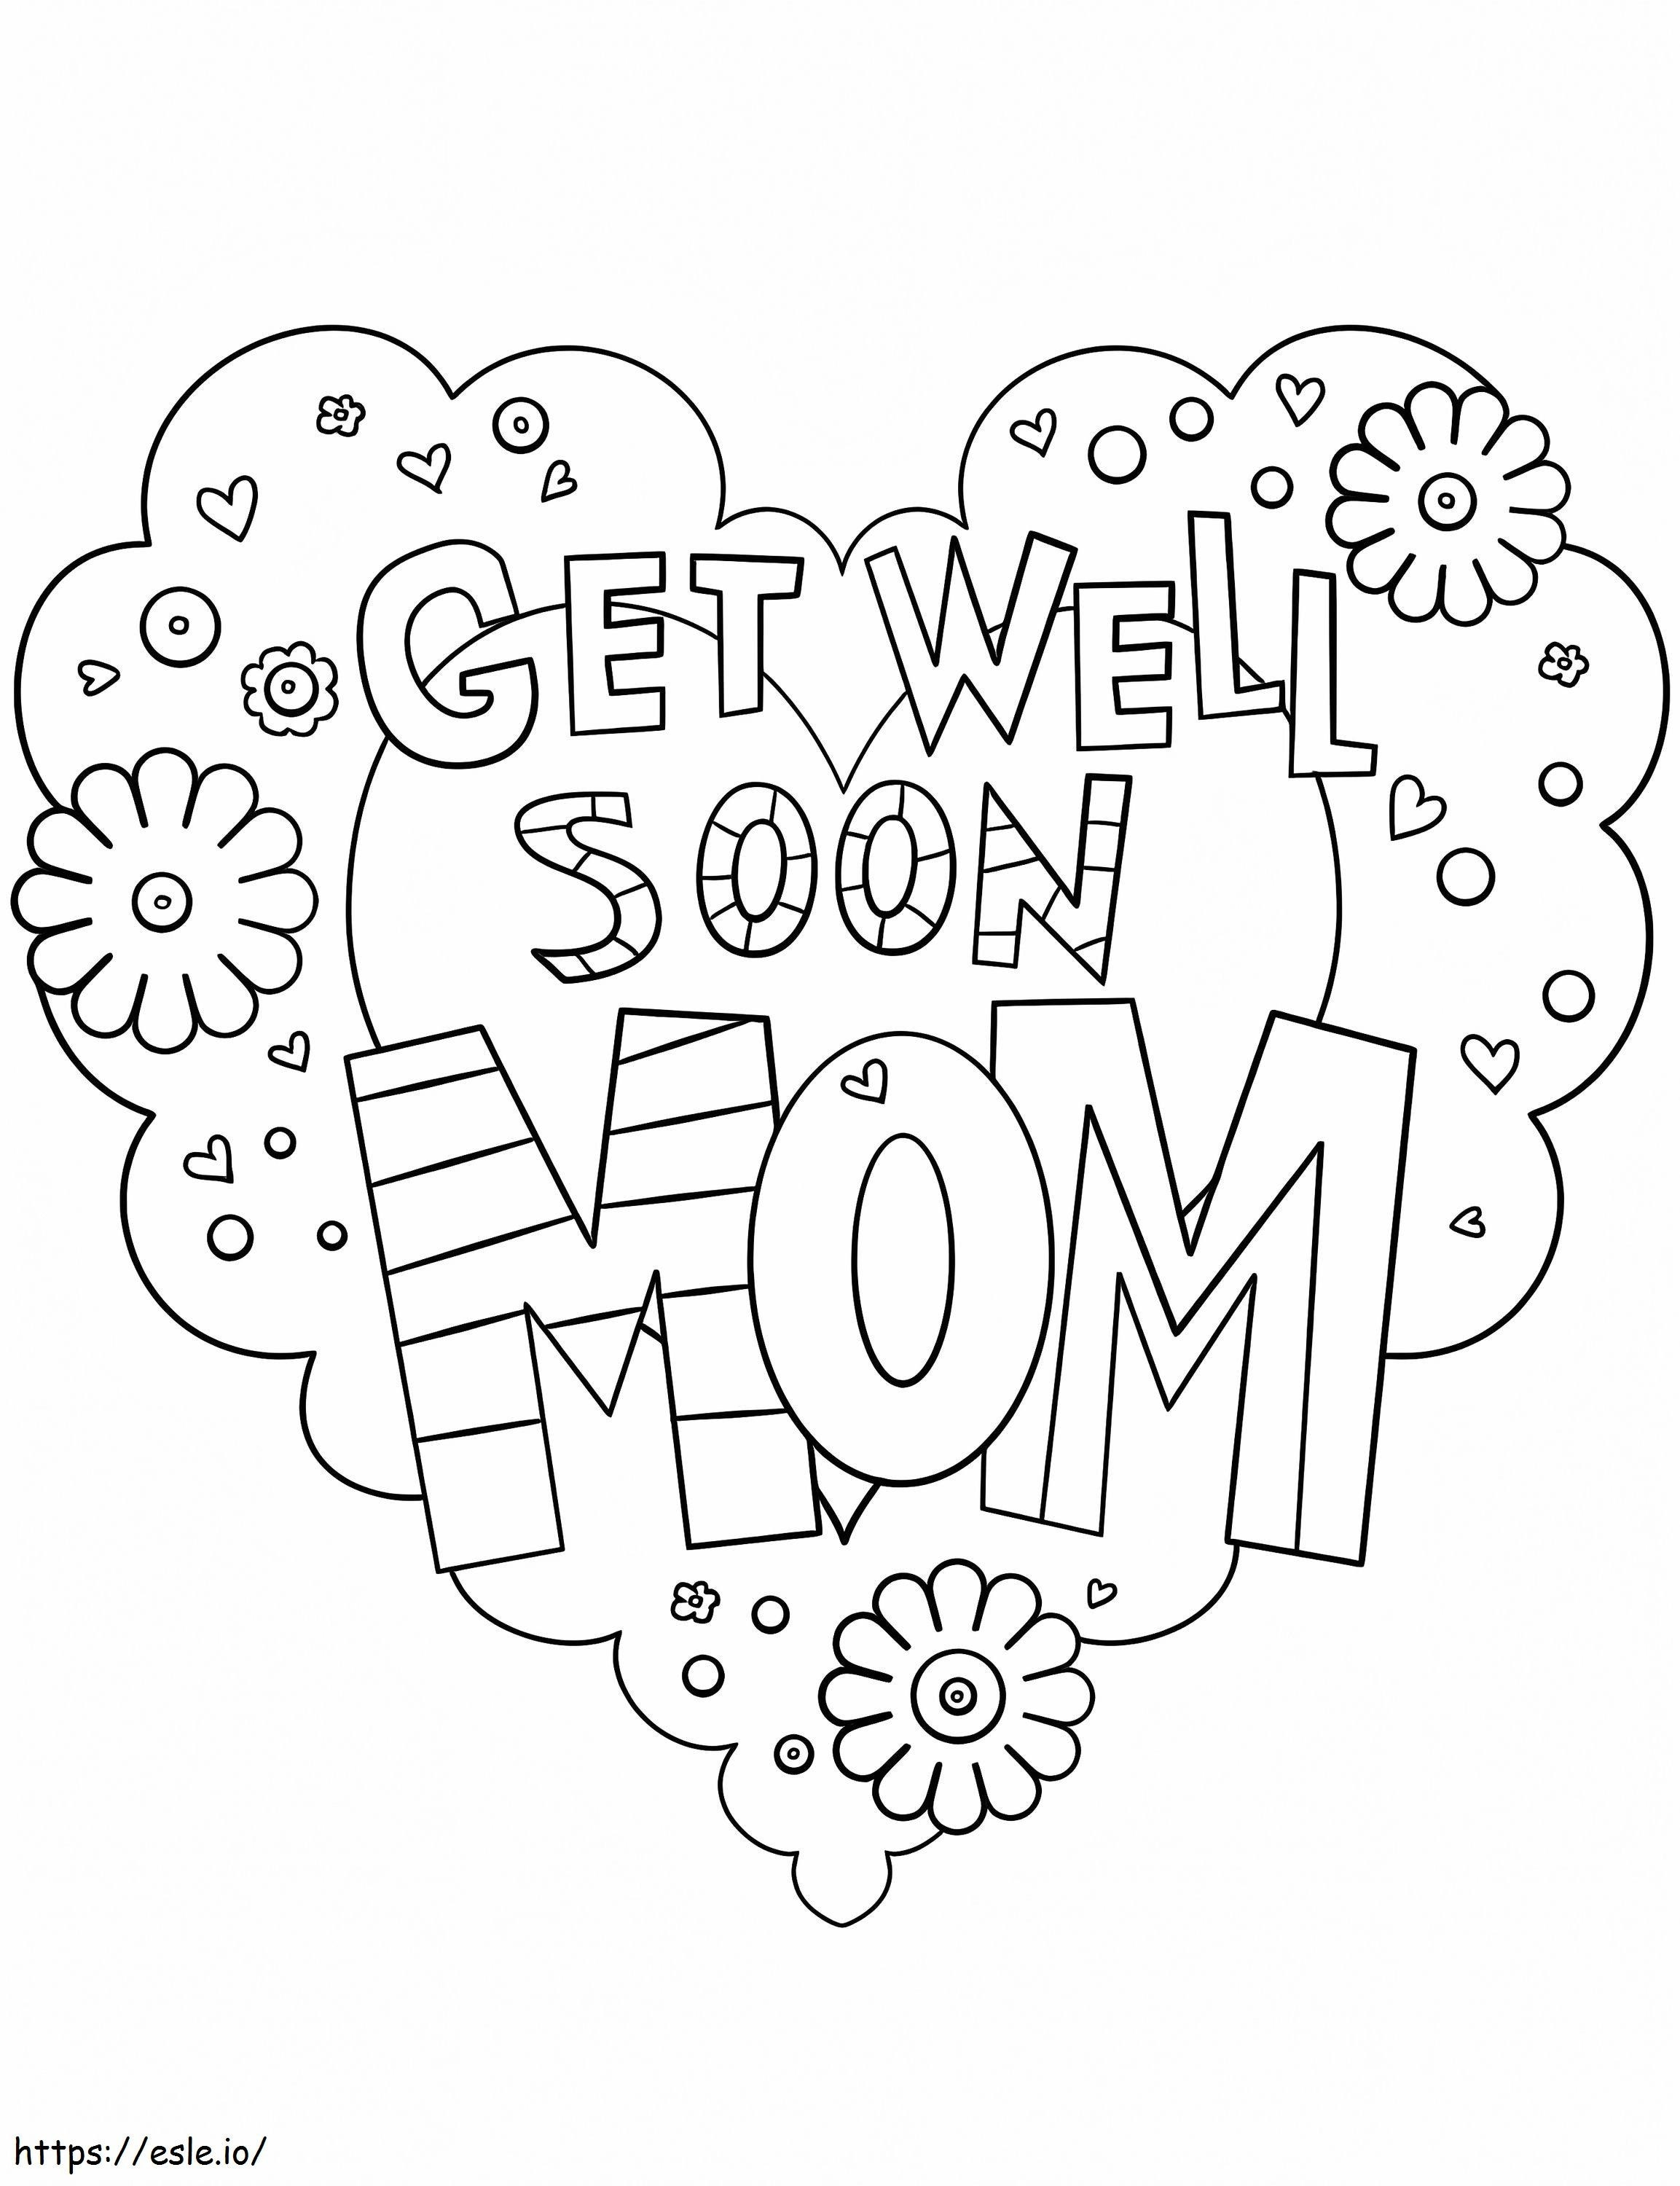 Get Well Soon Mom coloring page